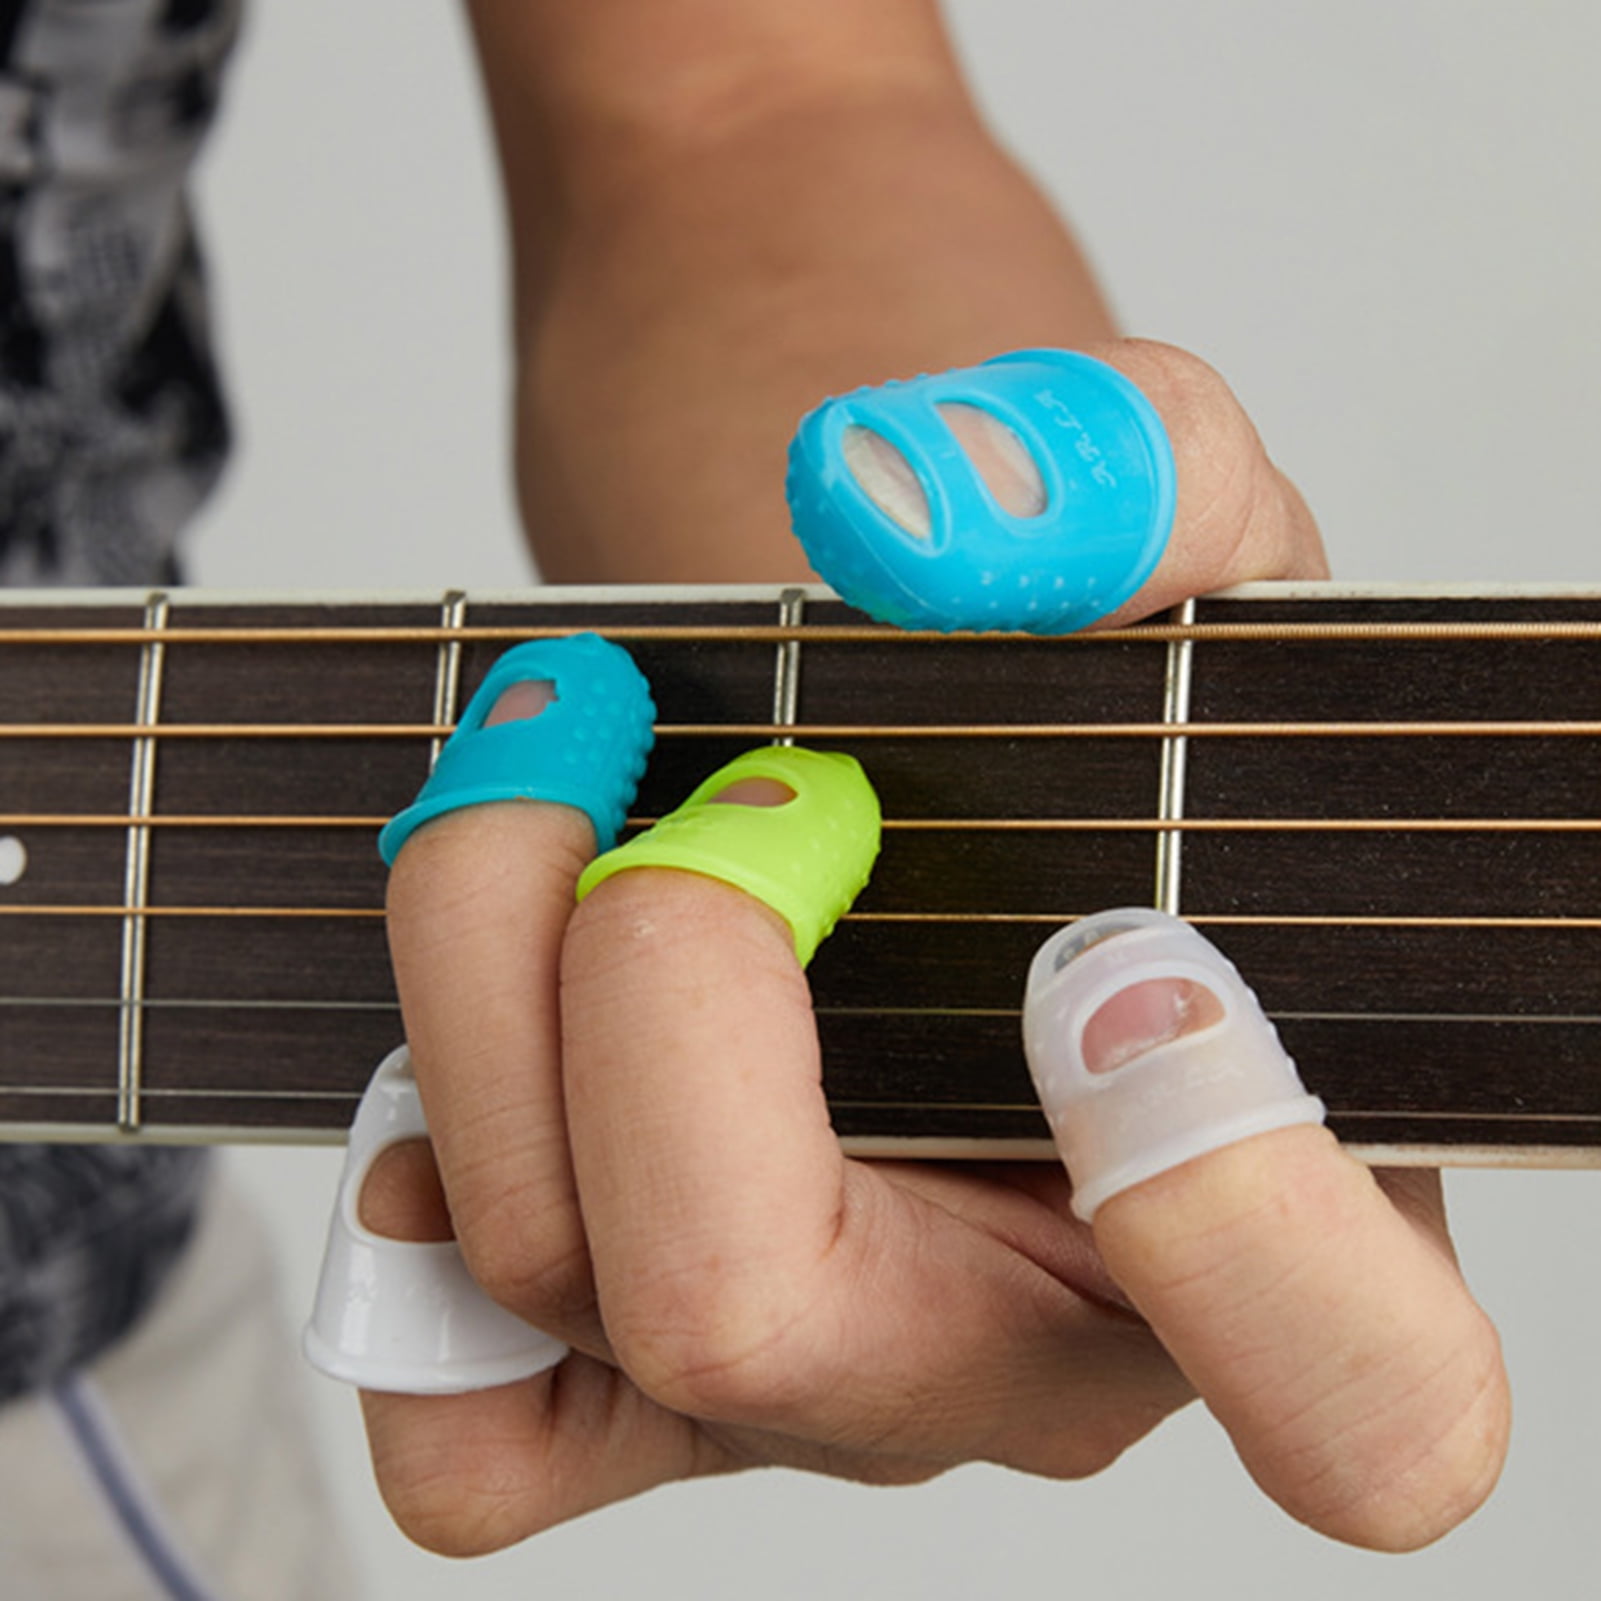 Play Guitar With Confidence With Silicone Guitar Finger Guard